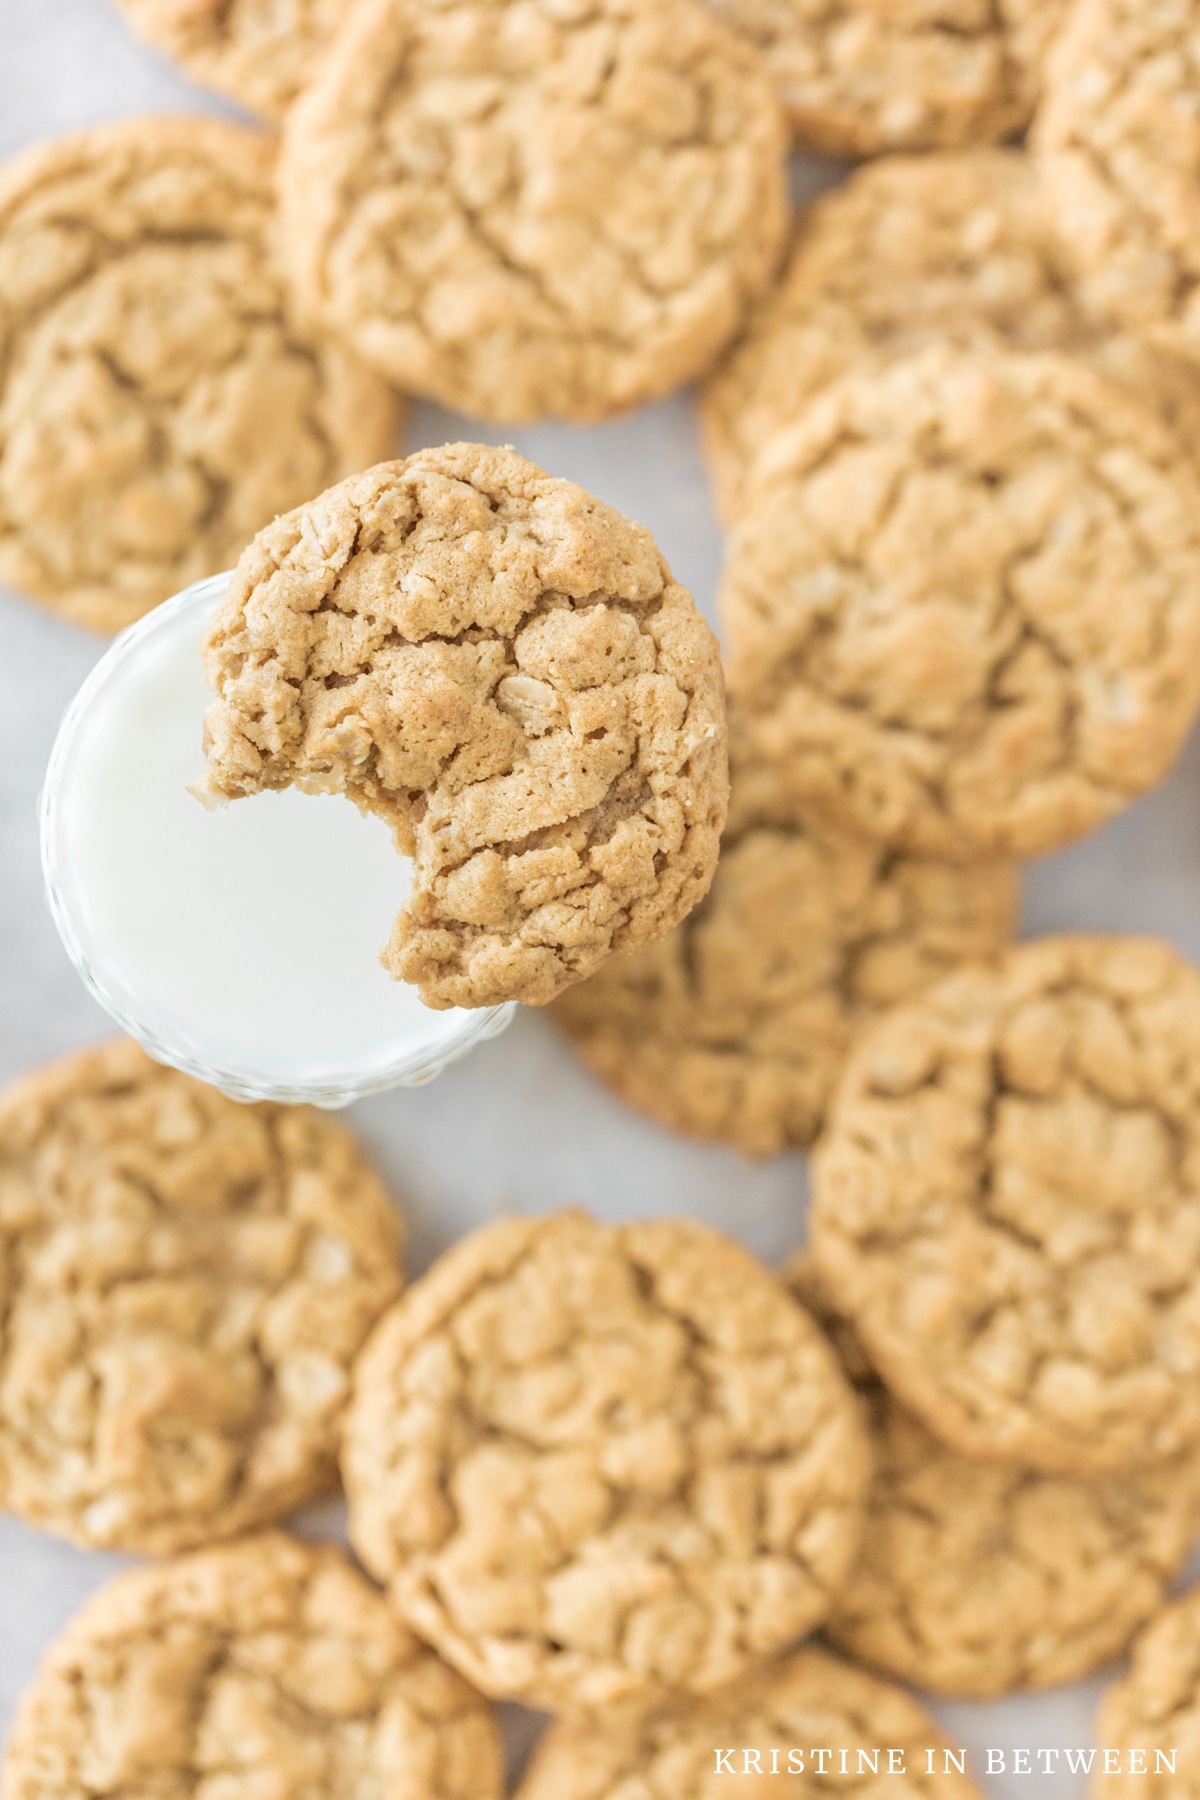 A cookie with a bite out of it balancing on a glass of milk.